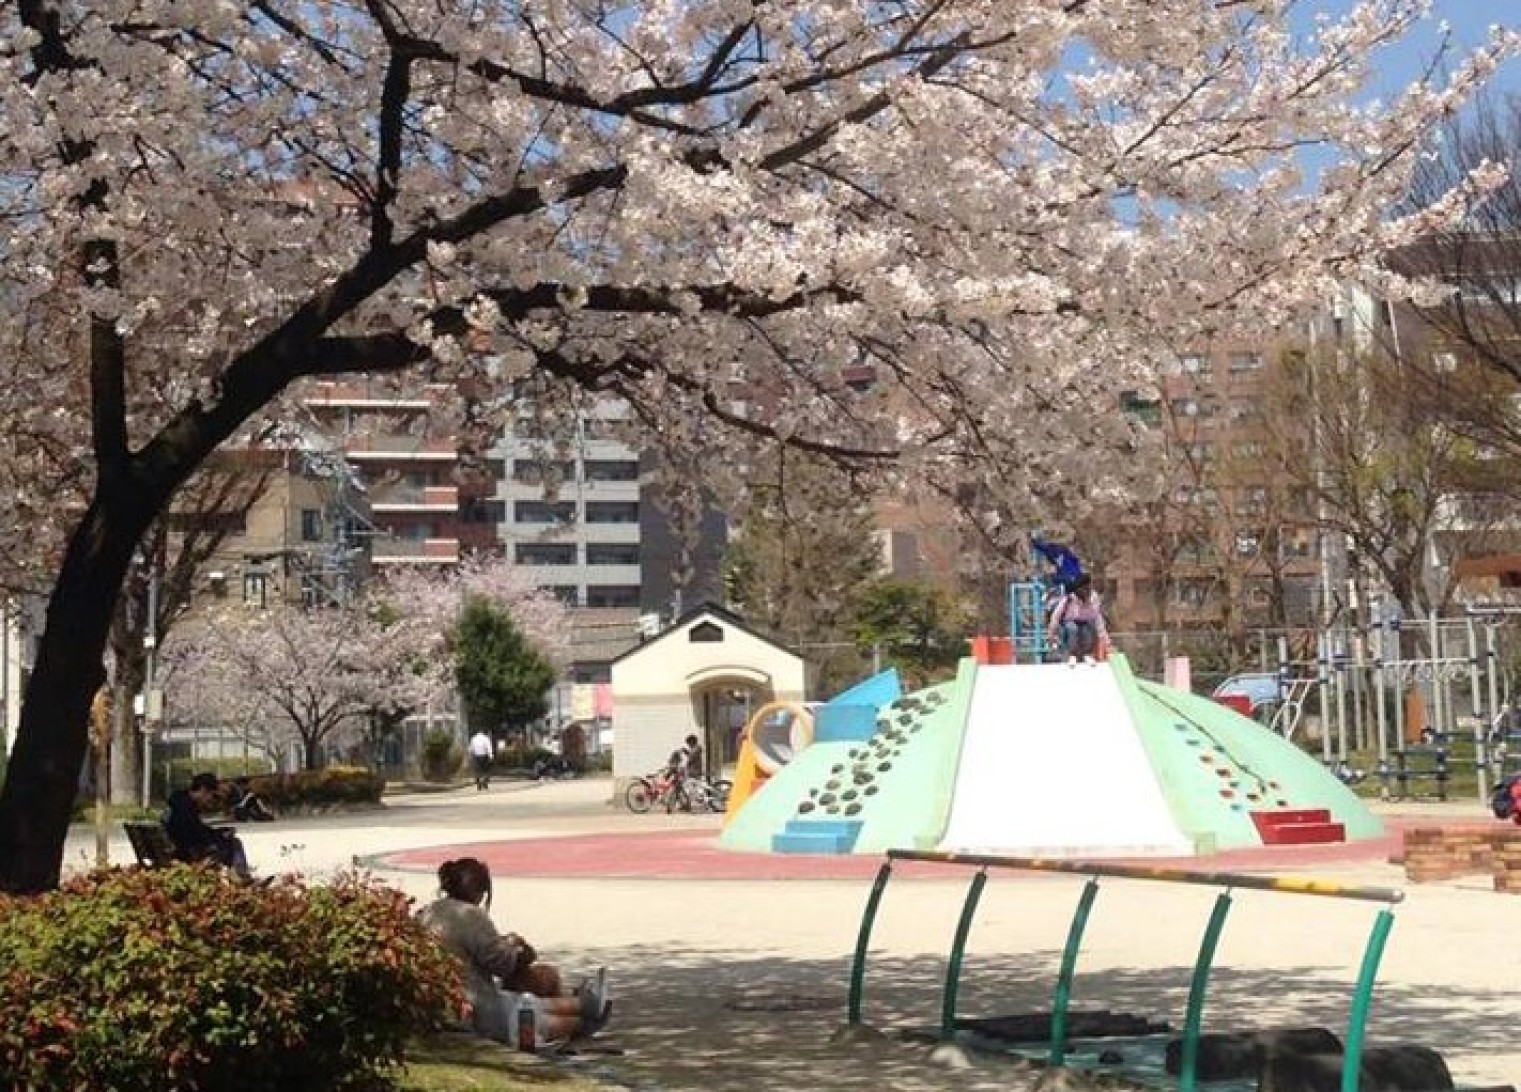 Playground in Japan with cherry trees